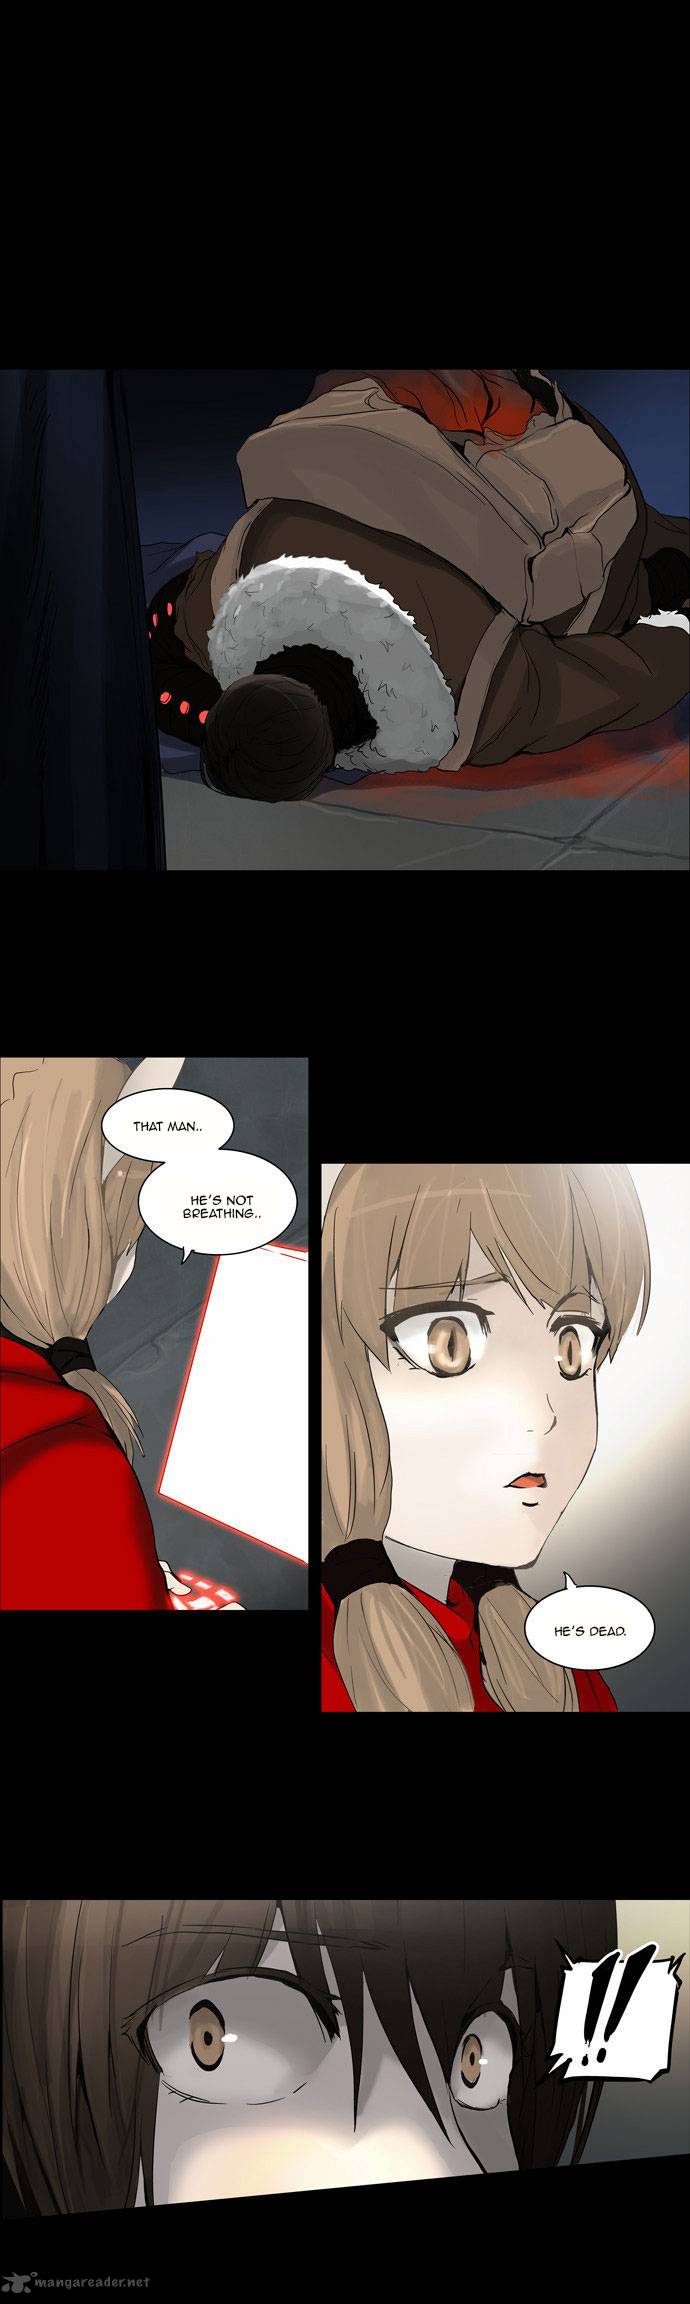 Tower Of God 129 6